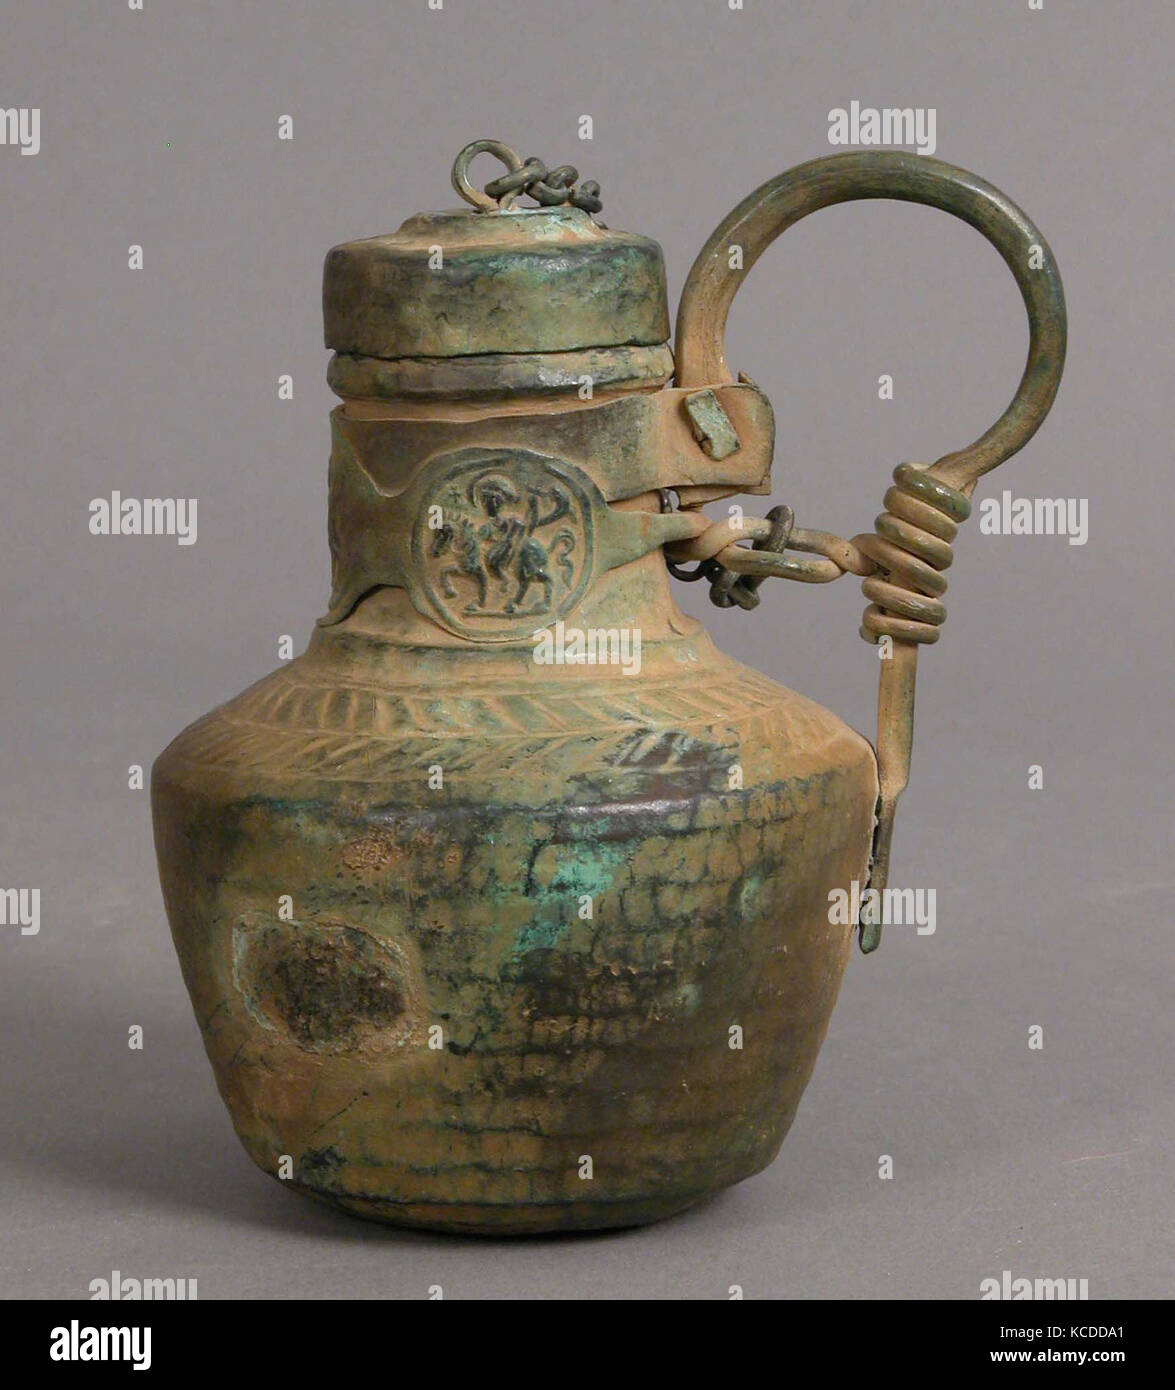 Jug with Medallions, 6th–8th century, Byzantine, Copper alloy, Overall: 4 15/16 x 4 x 3 3/8 in. (12.5 x 10.2 x 8.6 cm), Metal Stock Photo